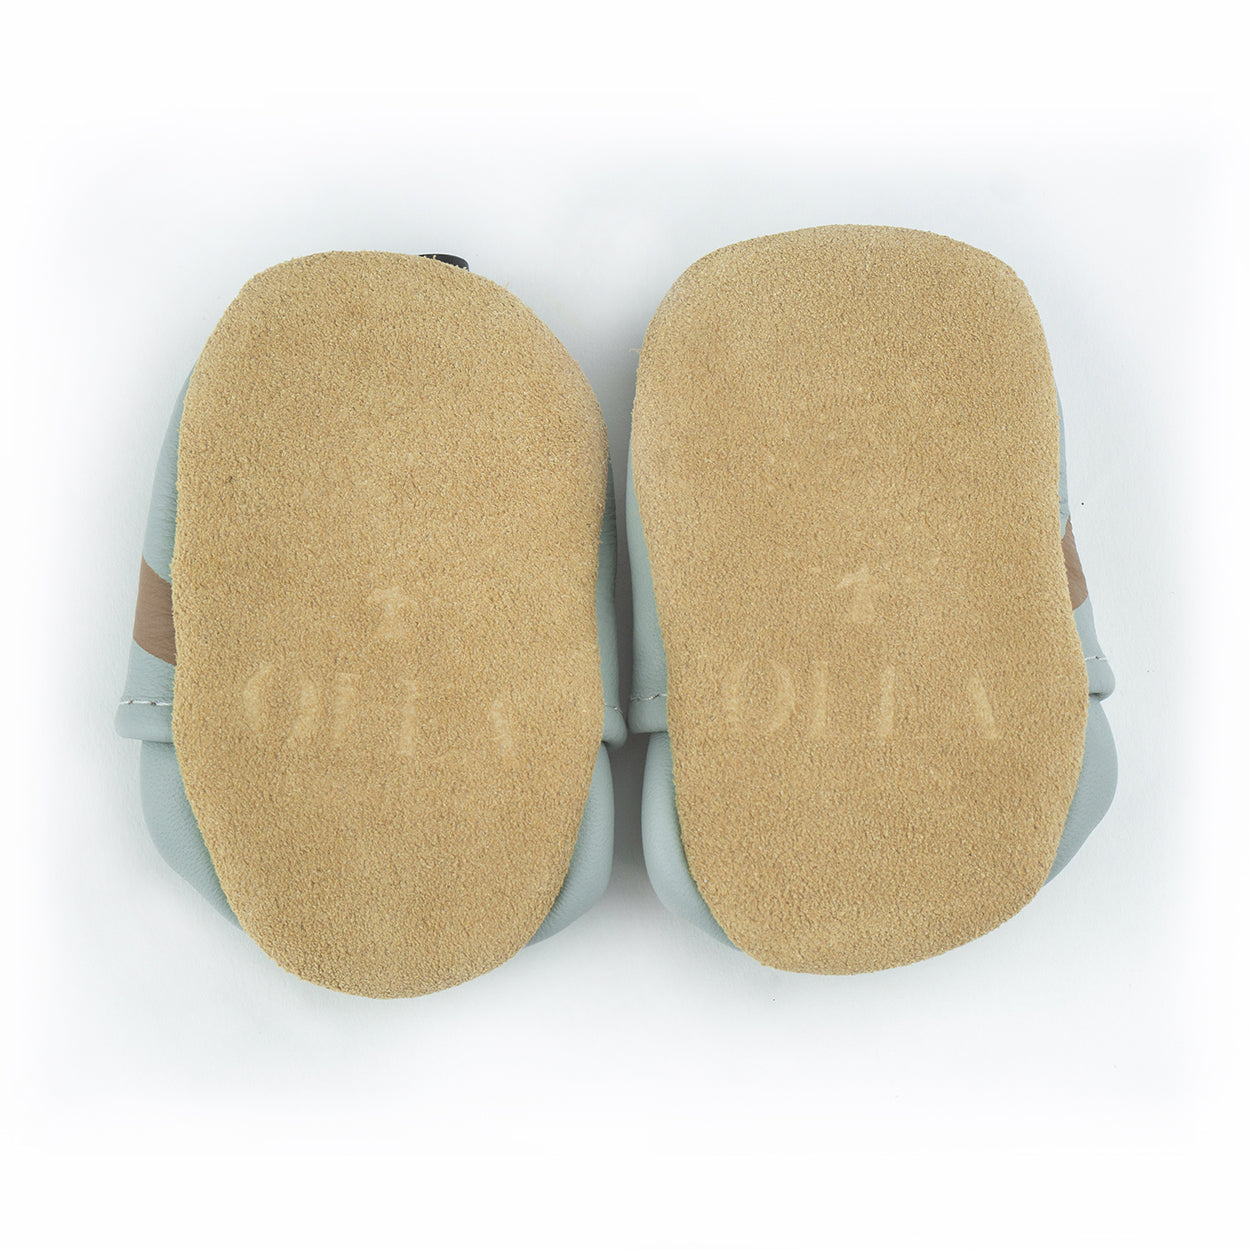 Soft Leather Baby Shoes Sloth